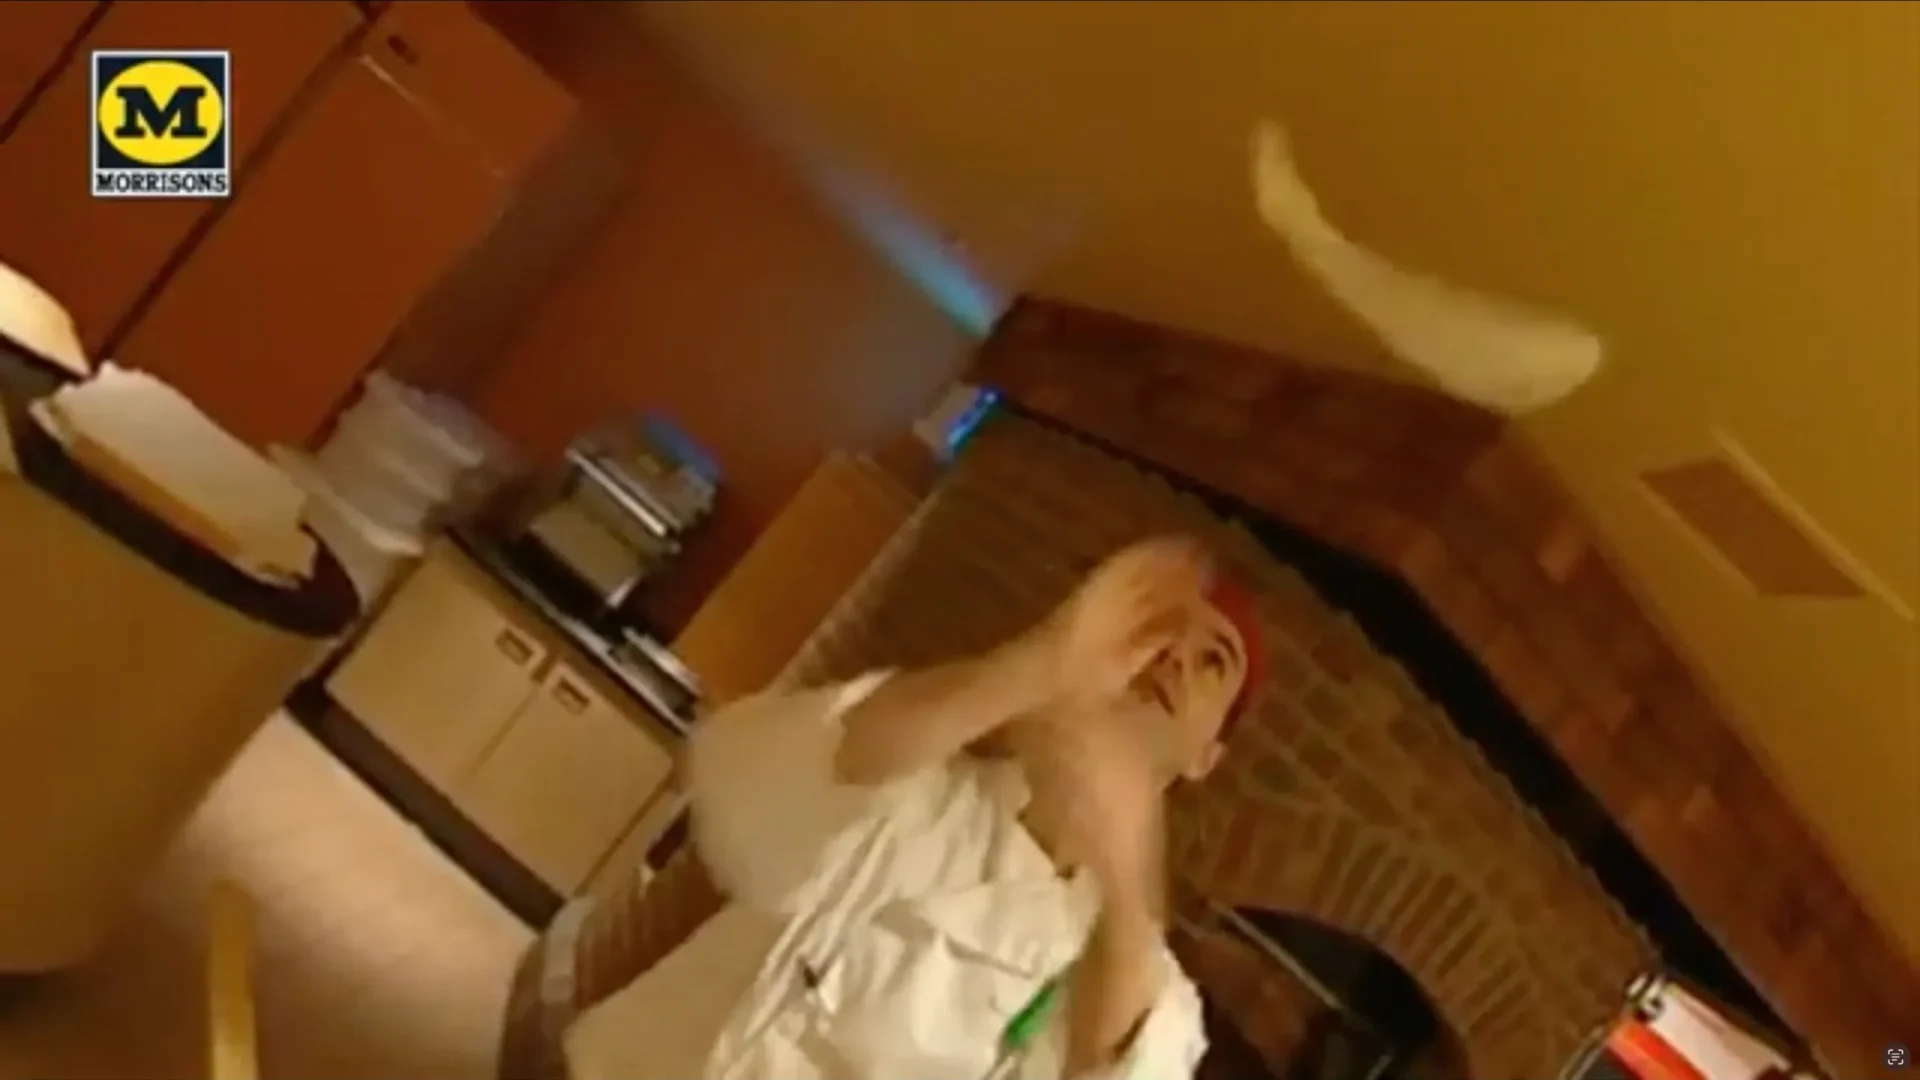 A man skillfully tosses a pizza dough high up in the air, showcasing his expertise in pizza making.